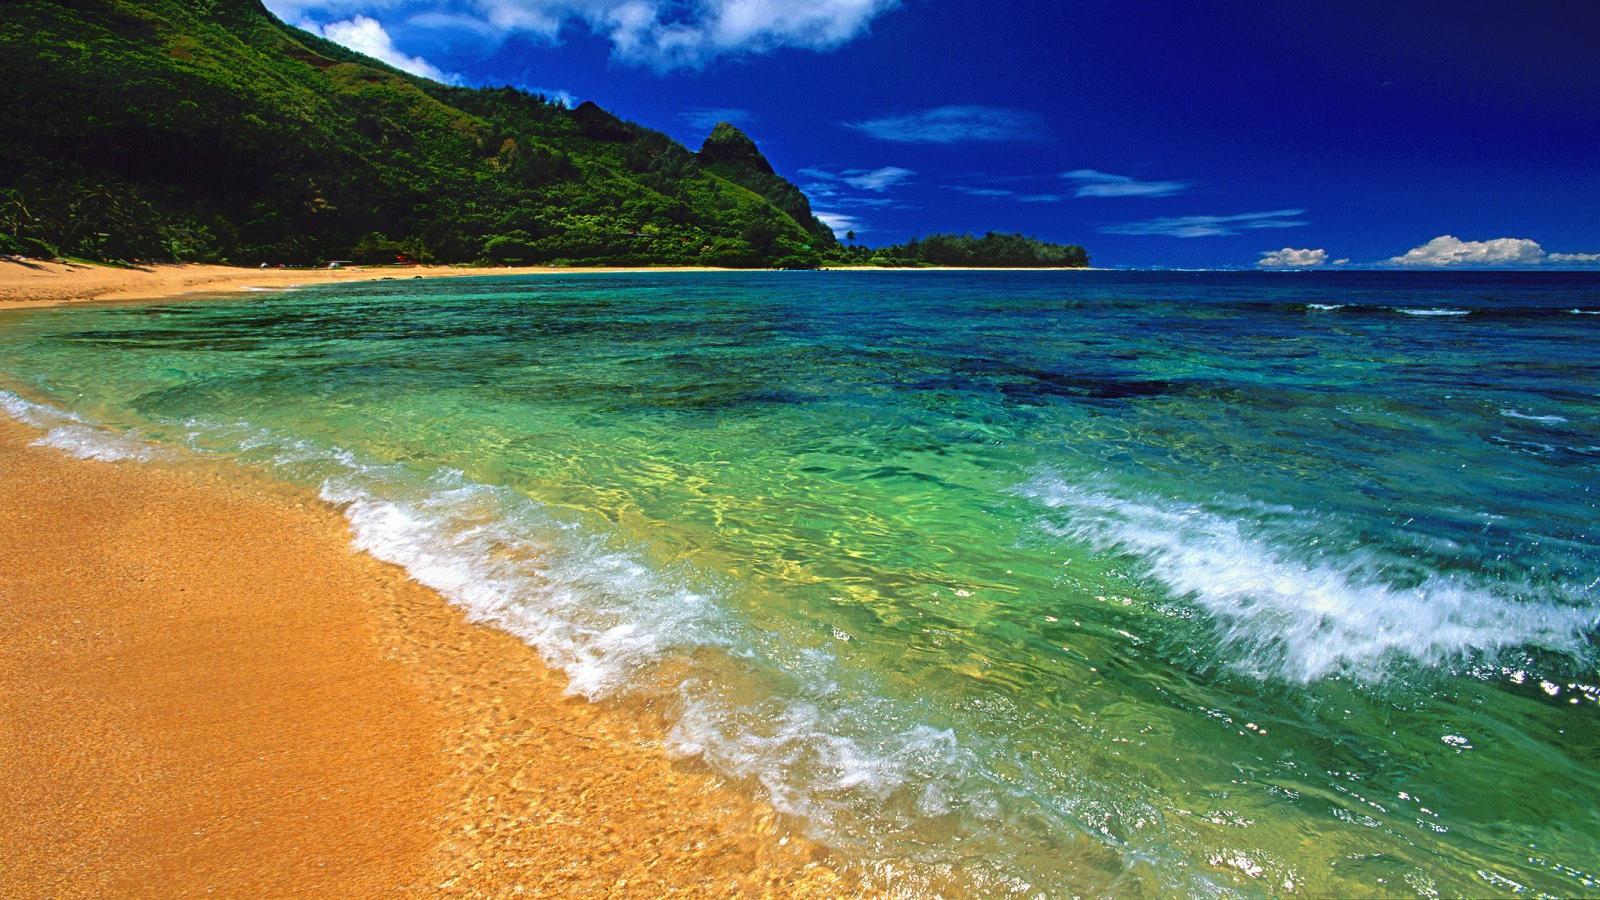 Wallpaper The Best Beach For HD Quality